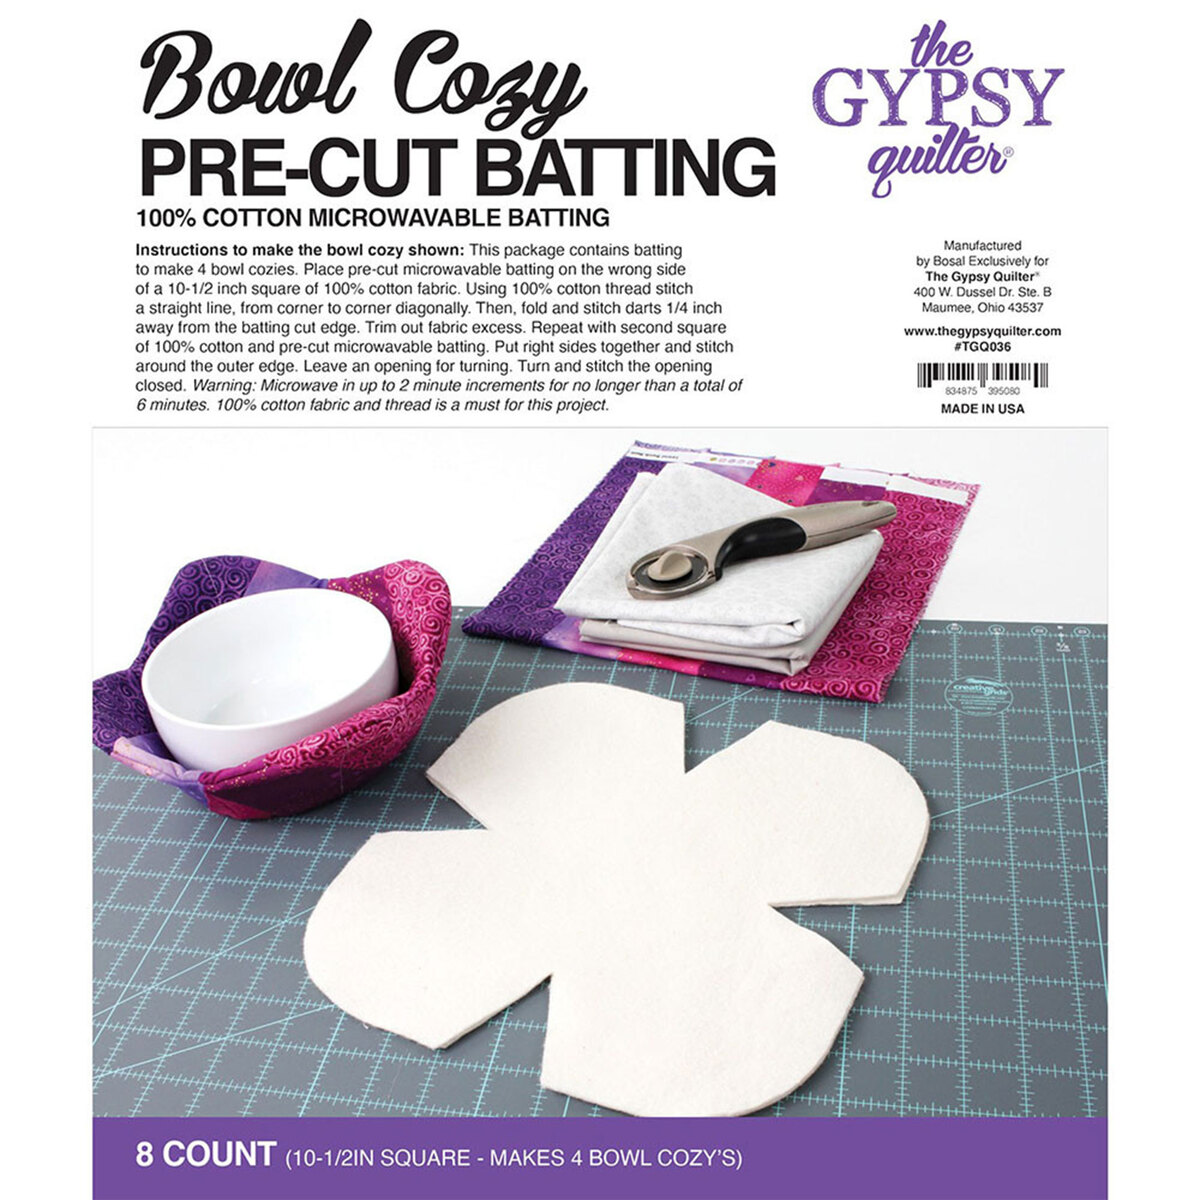 Why Cotton Batting Is The Most Popular Choice For Quilters - Suzy